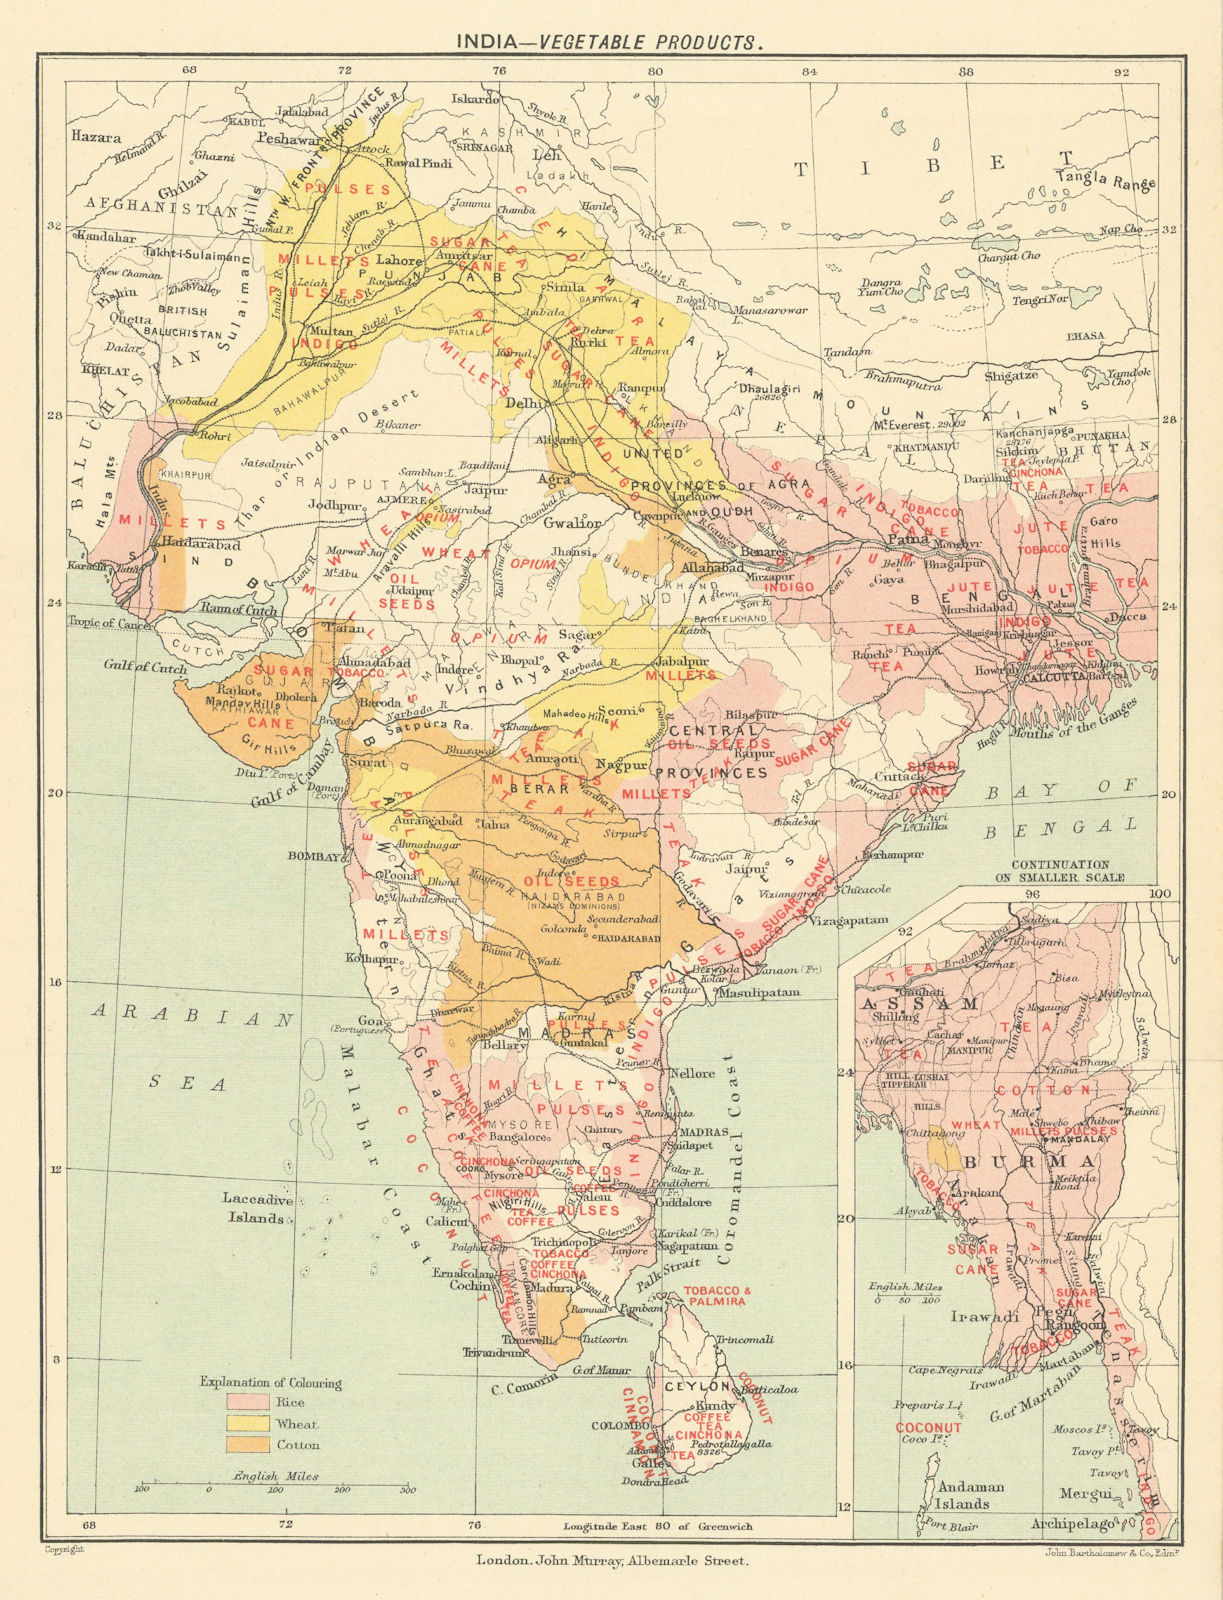 INDIA. Agricultural produce. Rice Wheat Cotton Sugar Opium Coffee Tea 1905 map